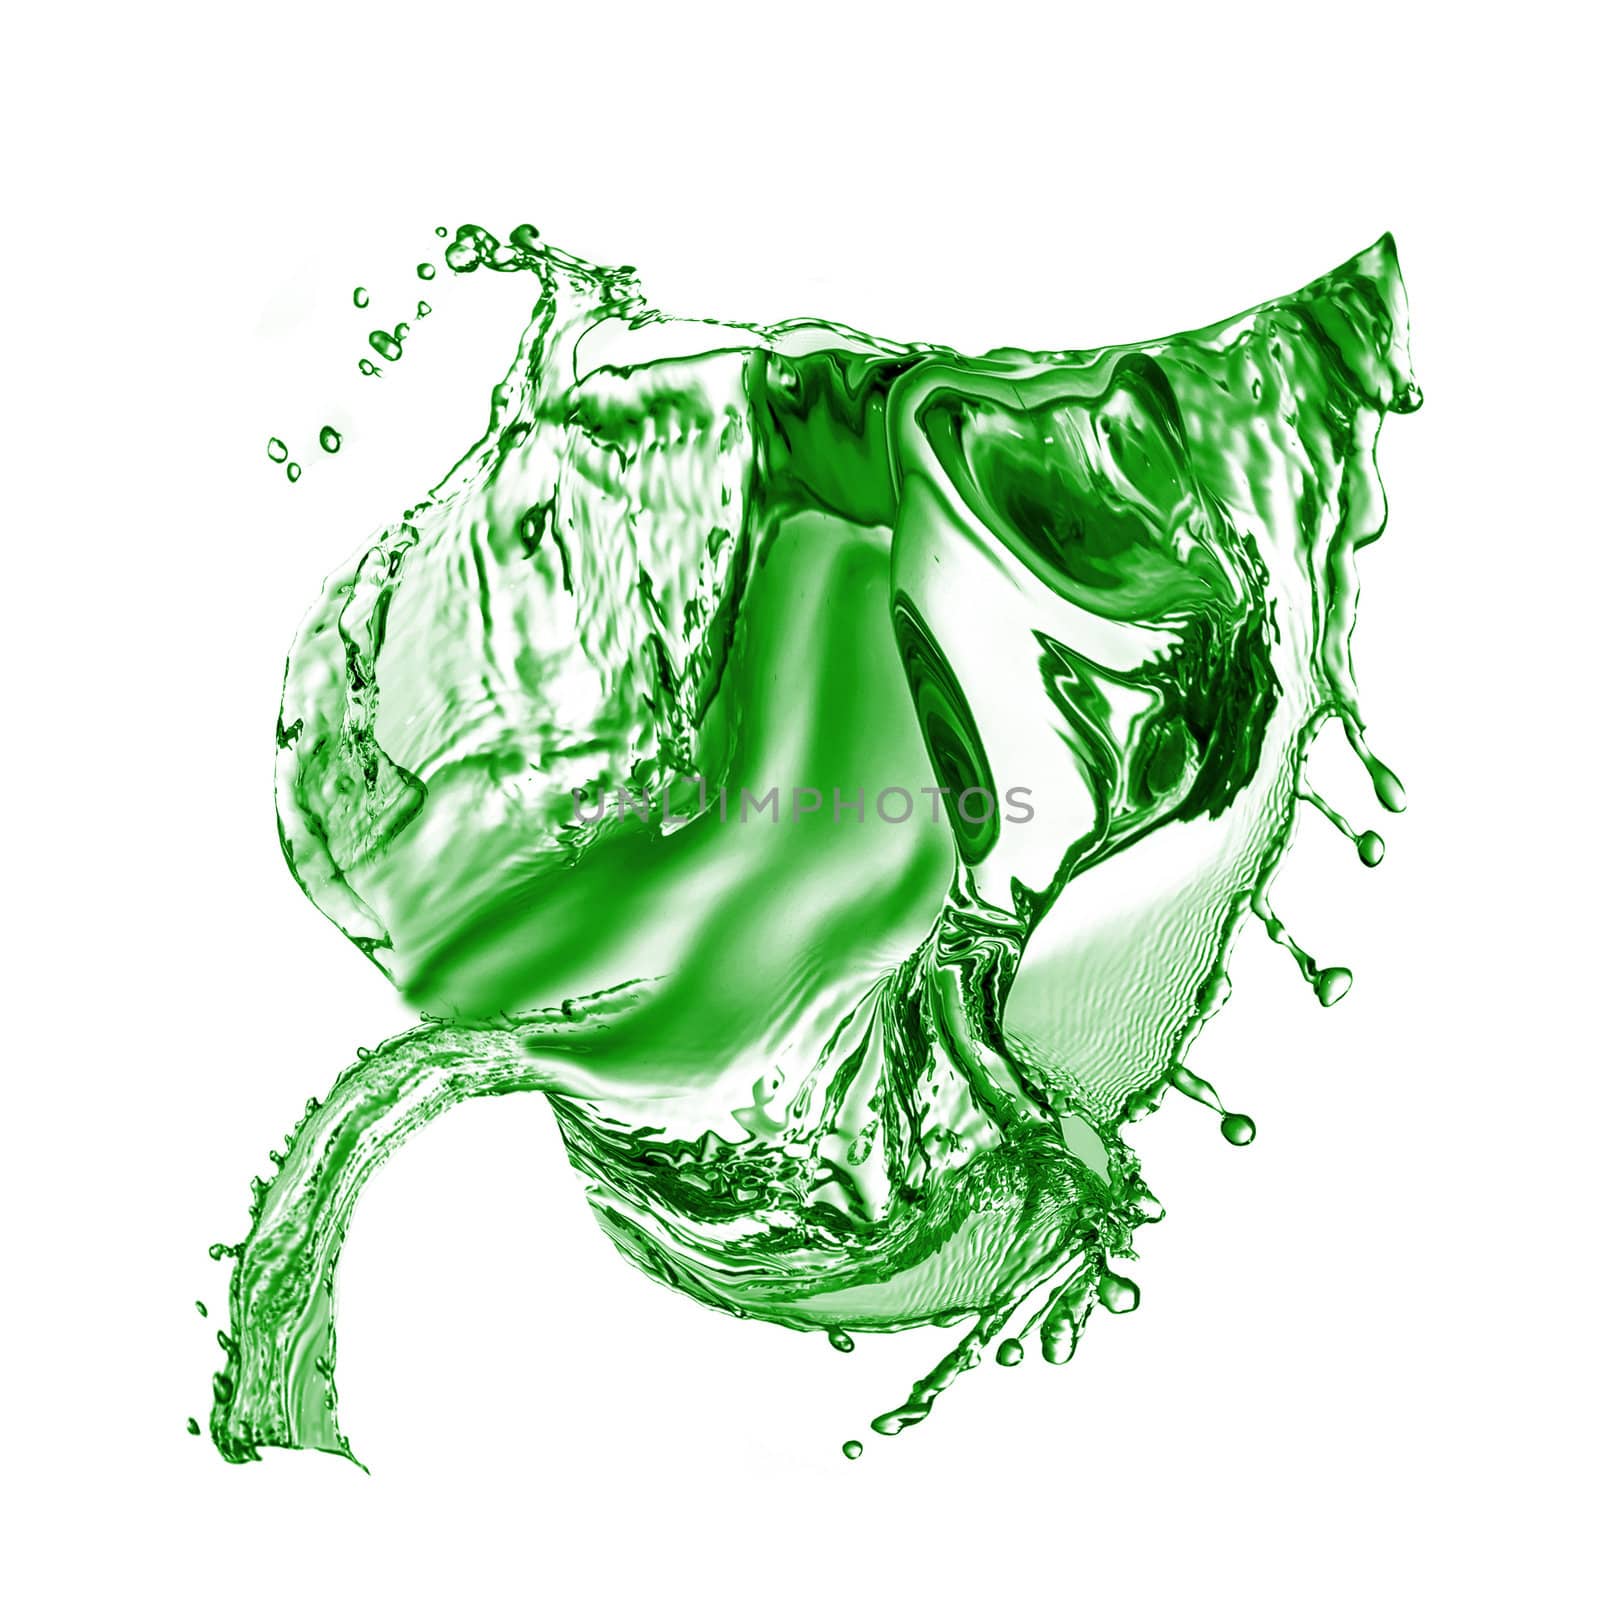 Green Leaf made of water splash isolated on a white background